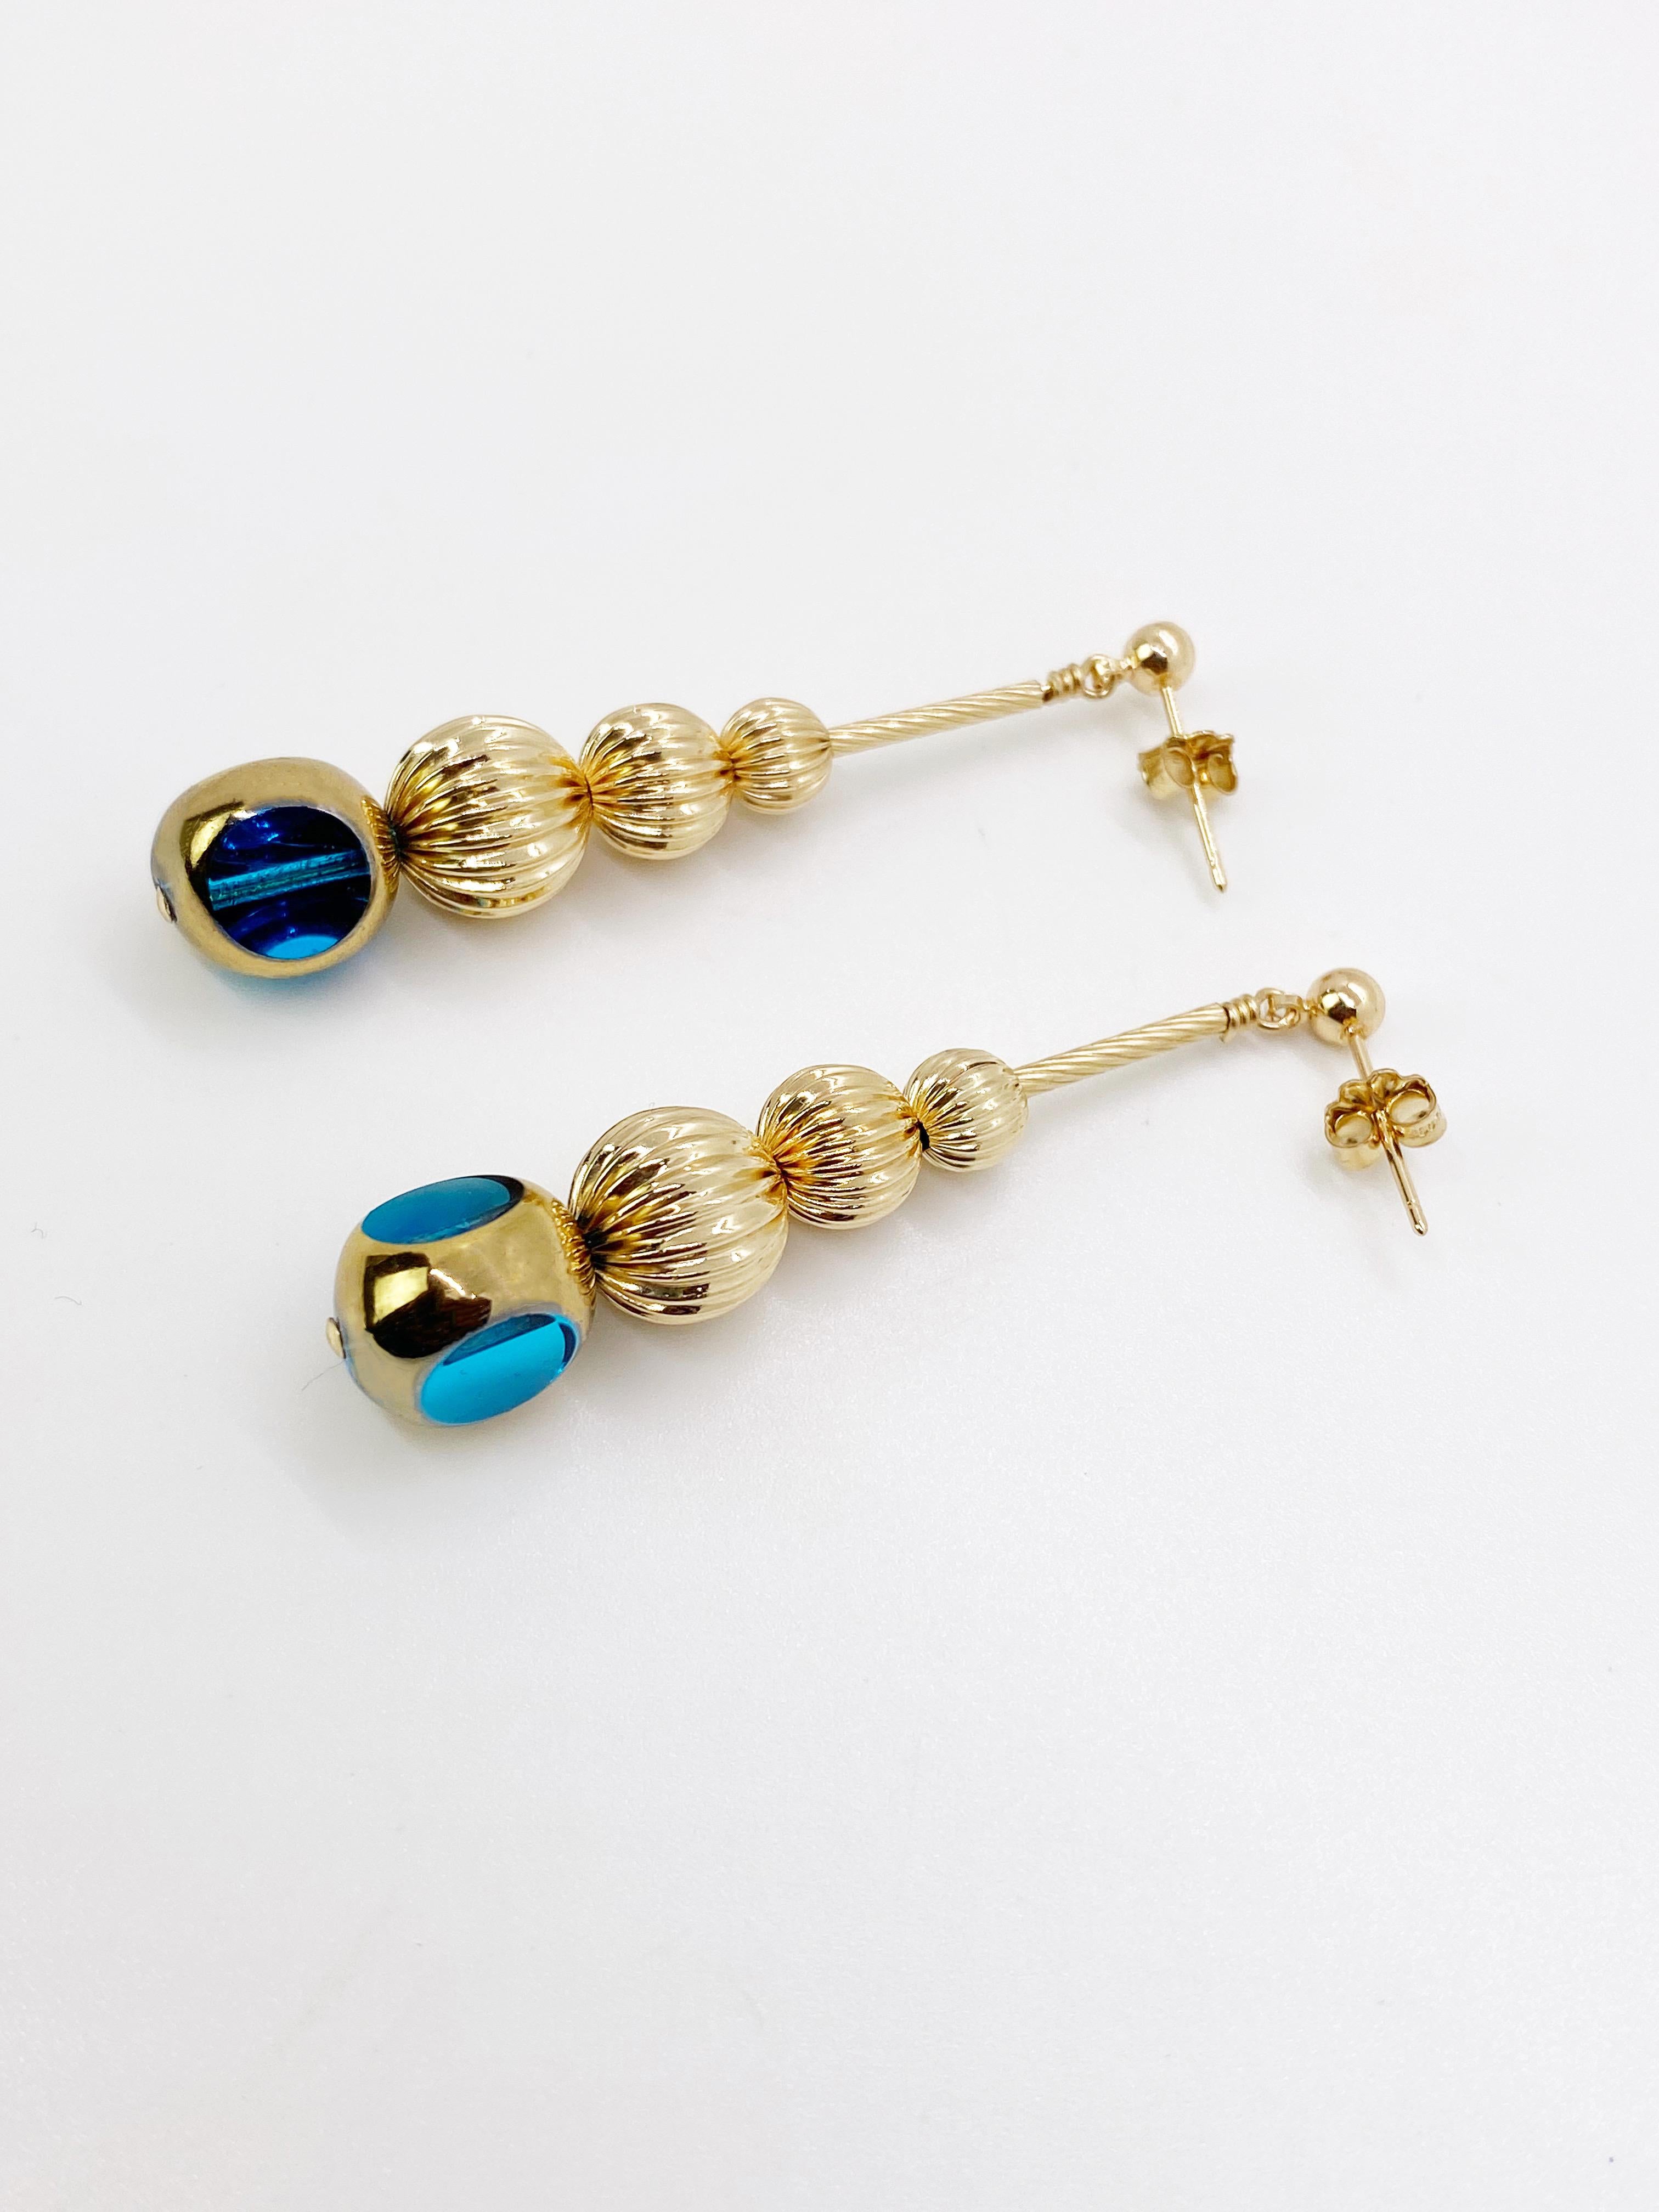 This is a listing of a pair of earrings. Each earring consist of 1 semi-round translucent blue German vintage glass beads that are first plated with platinum and then plated with 24K gold. They are complimented with 3 graduated corrugated round